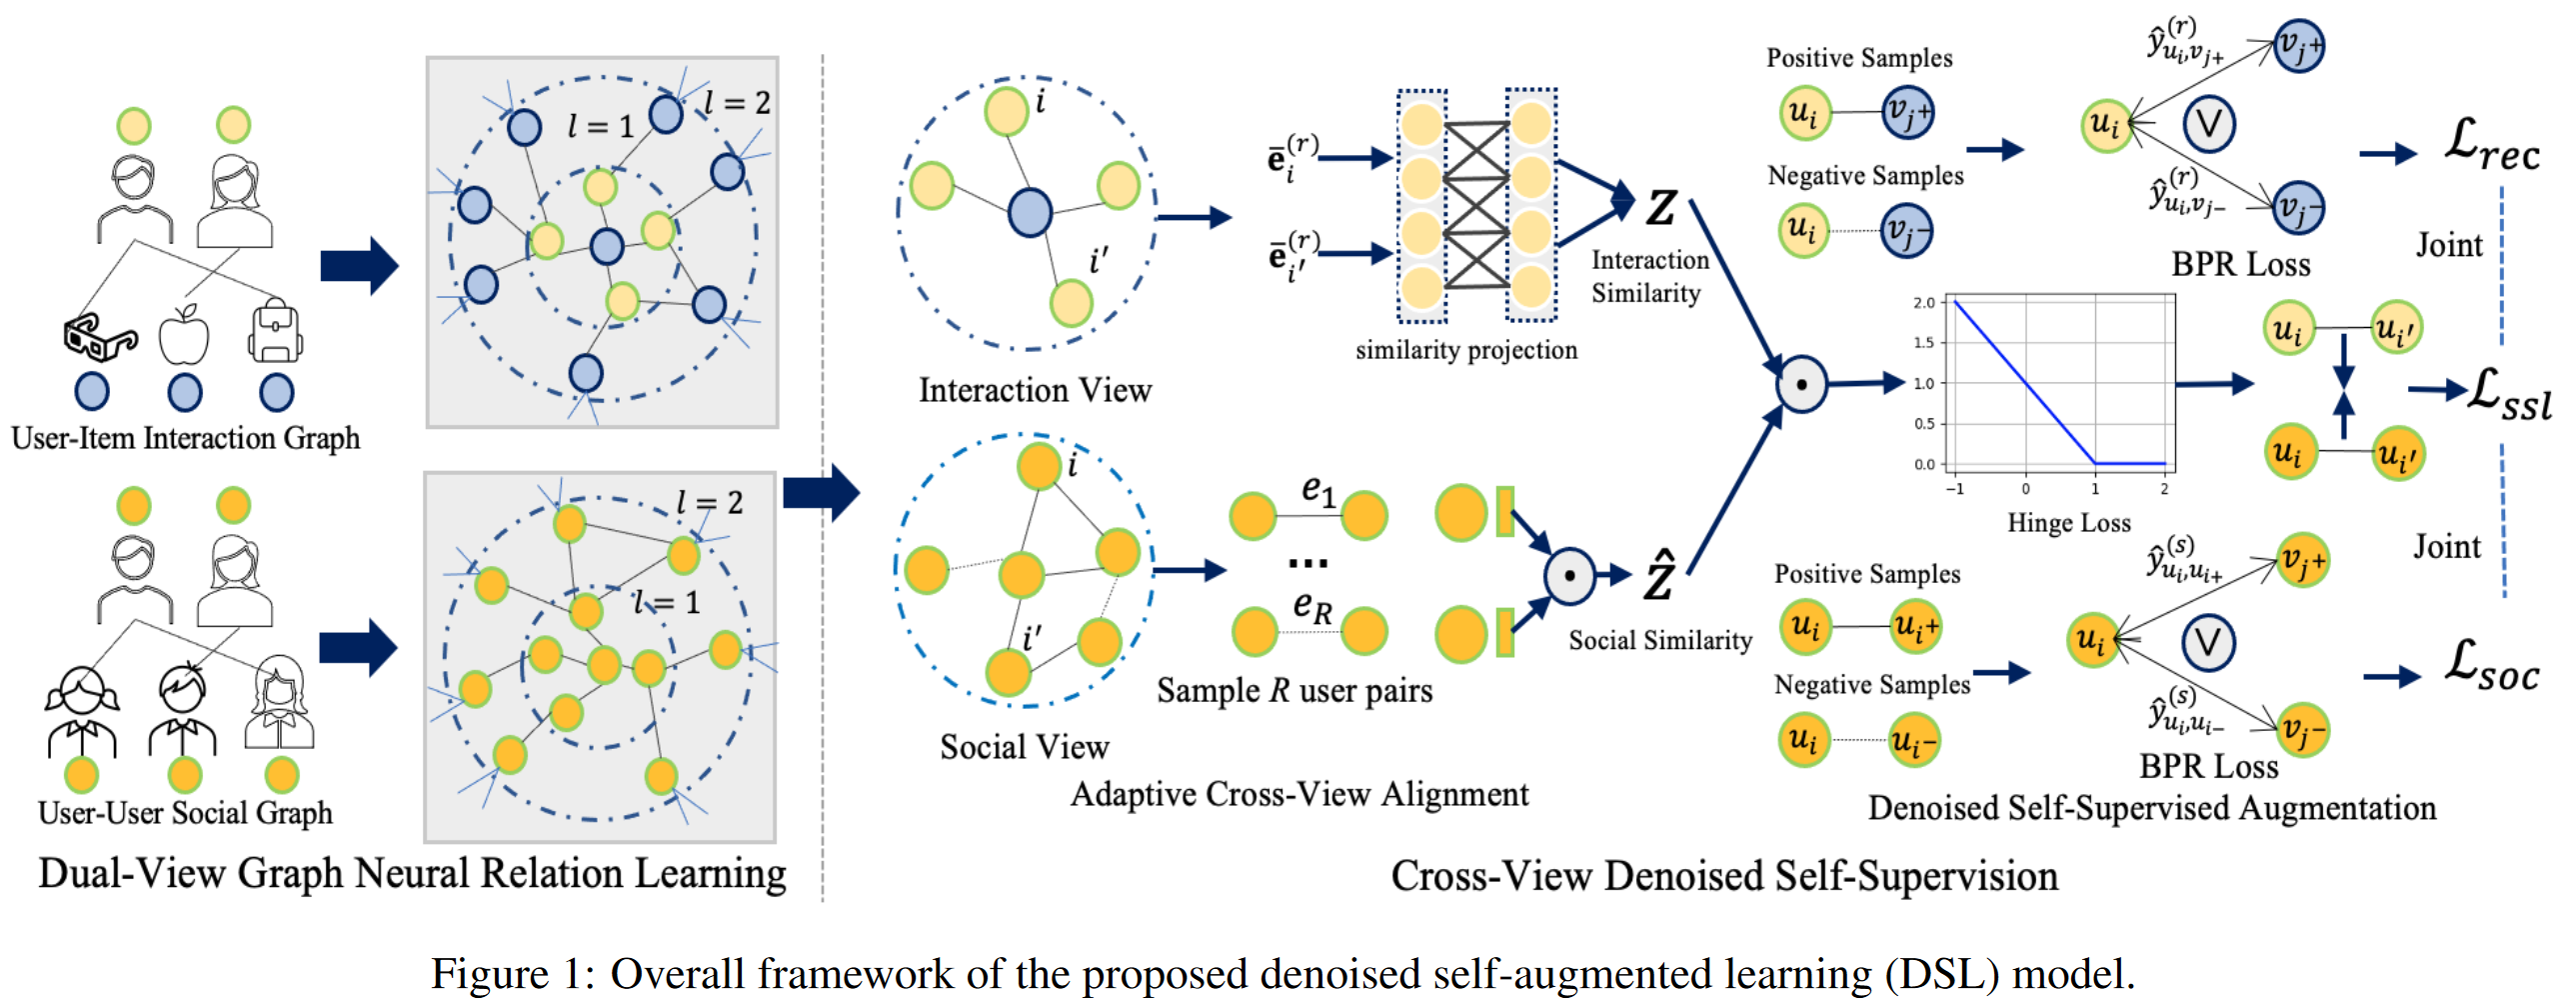 \<img alt="" data-attachment-key="V7QF7HVQ" width="1000" height="389.21226232052777" src="“Denoised Self-Augmented Learning for Social Recommendation”/V7QF7HVQ.png" ztype="zimage">